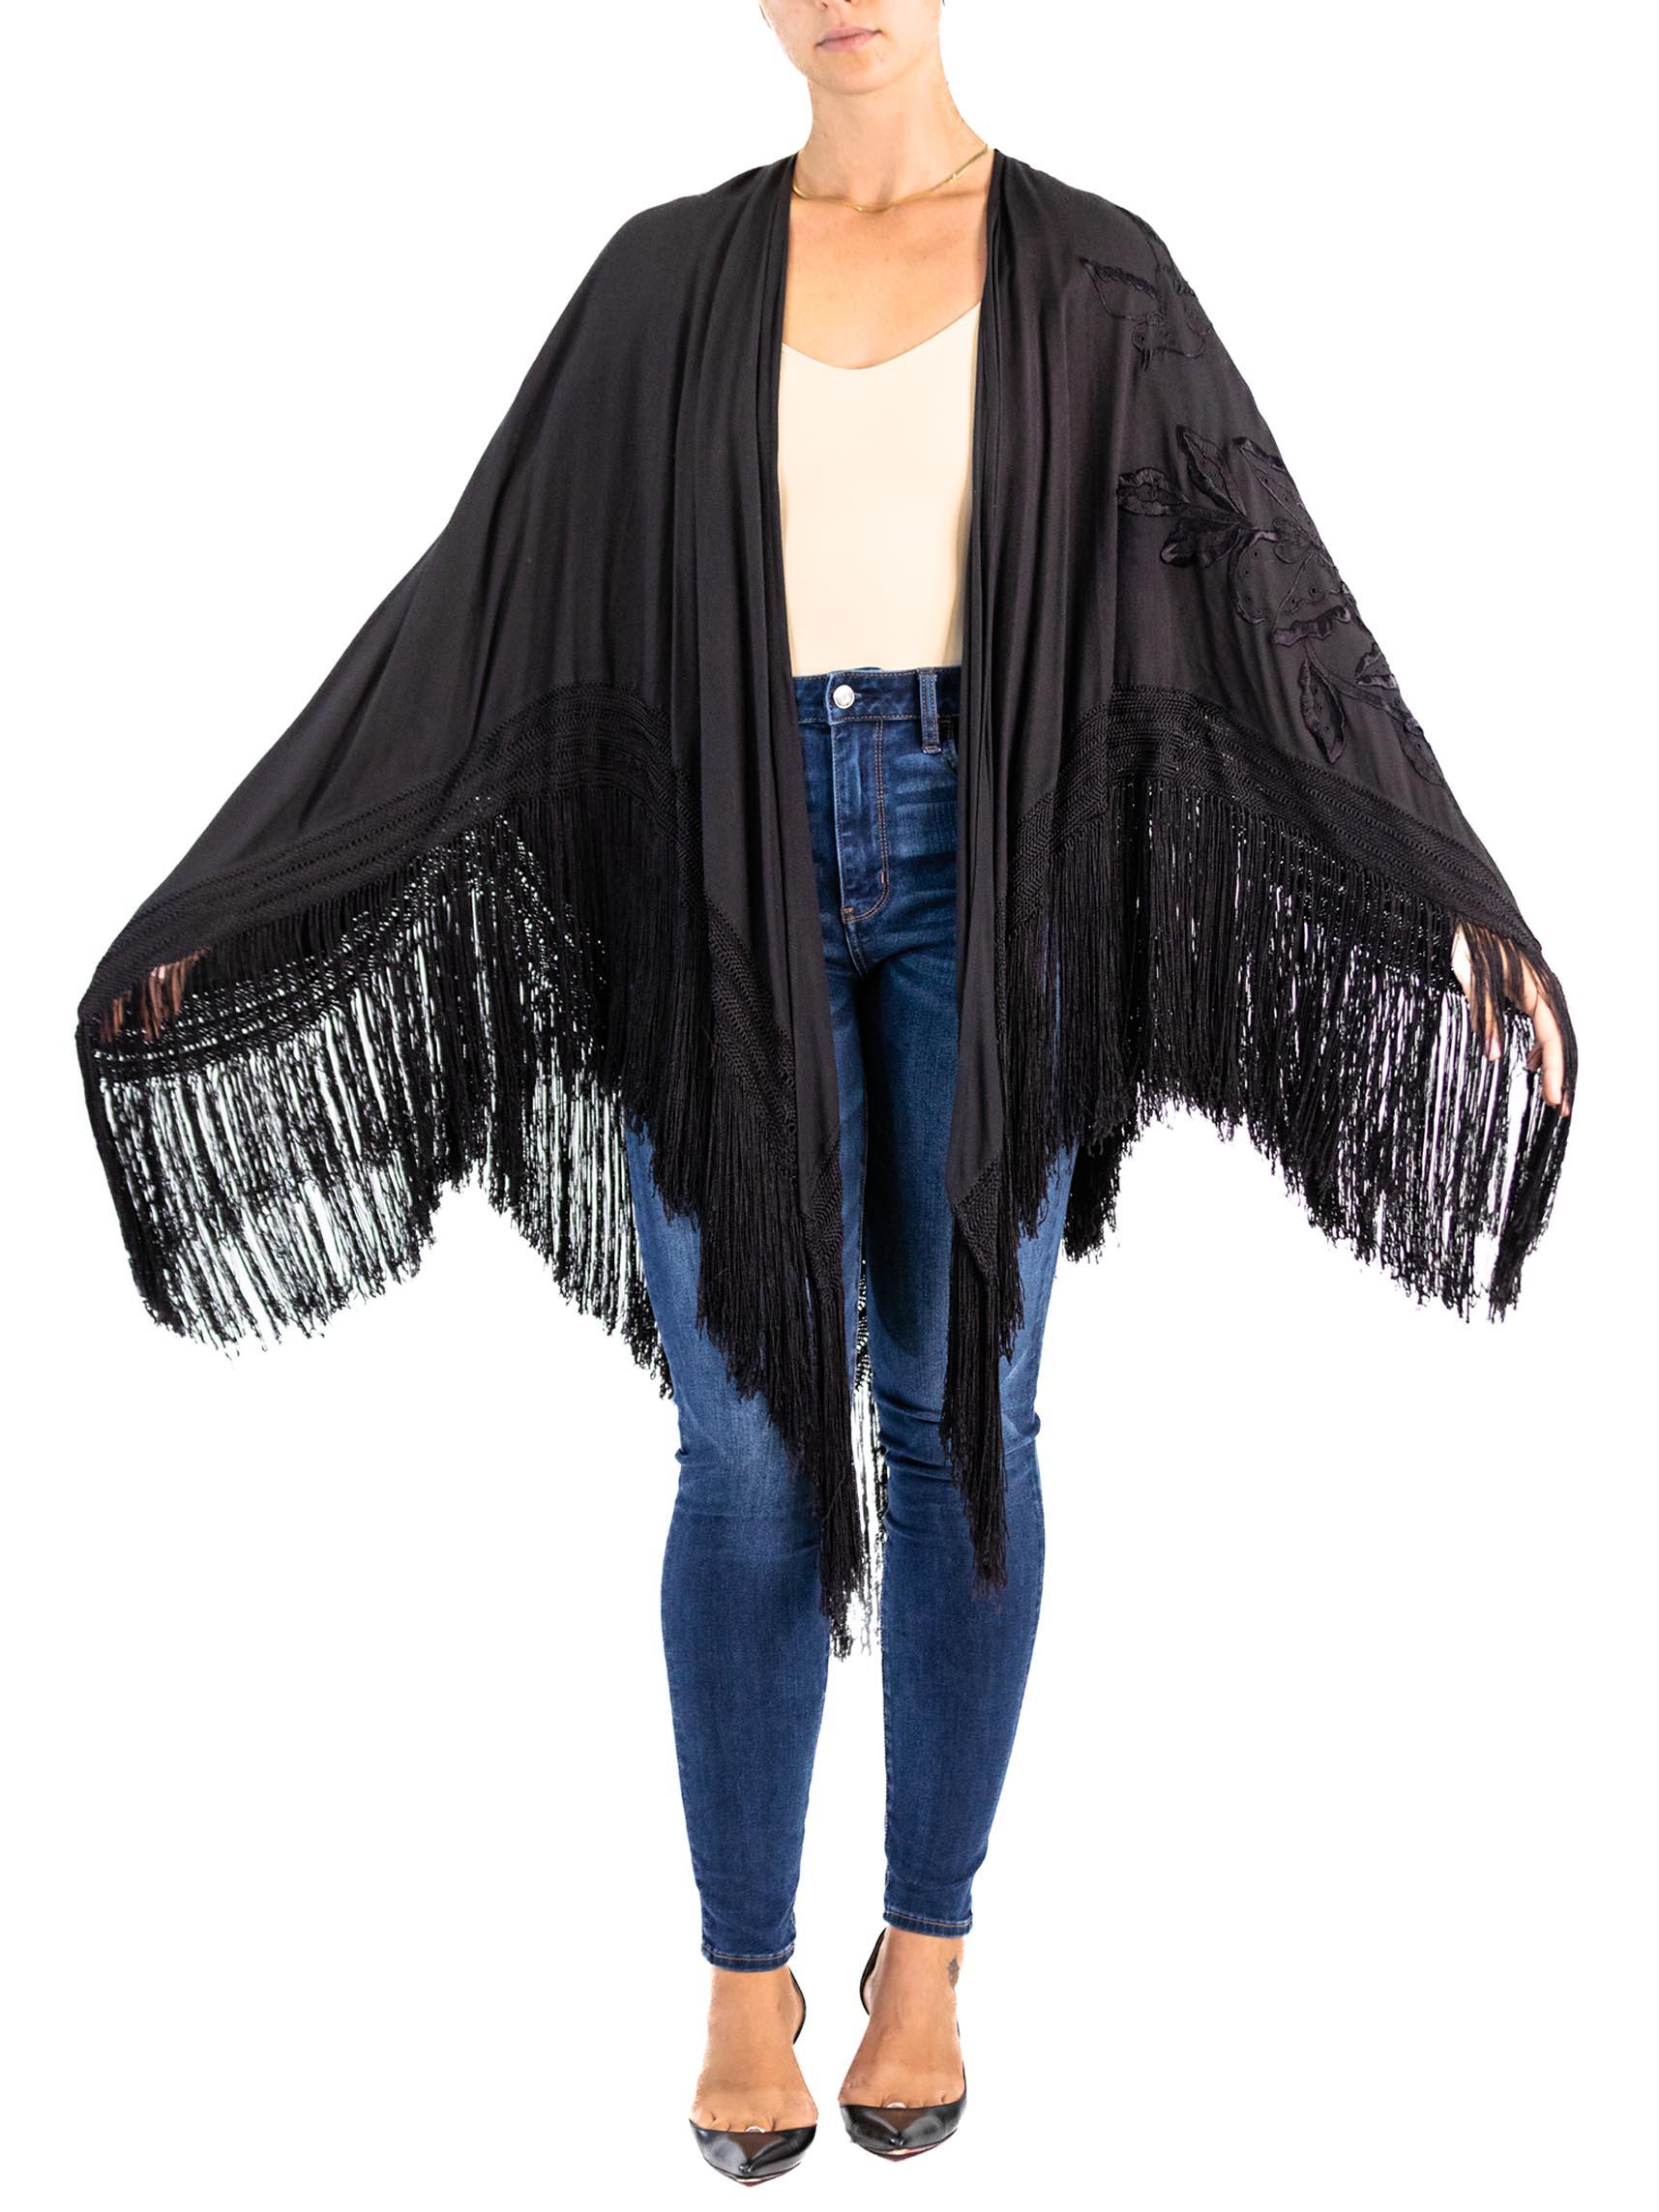 1920S Black Hand Embroidered Wool Blend Piano Shawl Style Jacket With Fringe For Sale 2